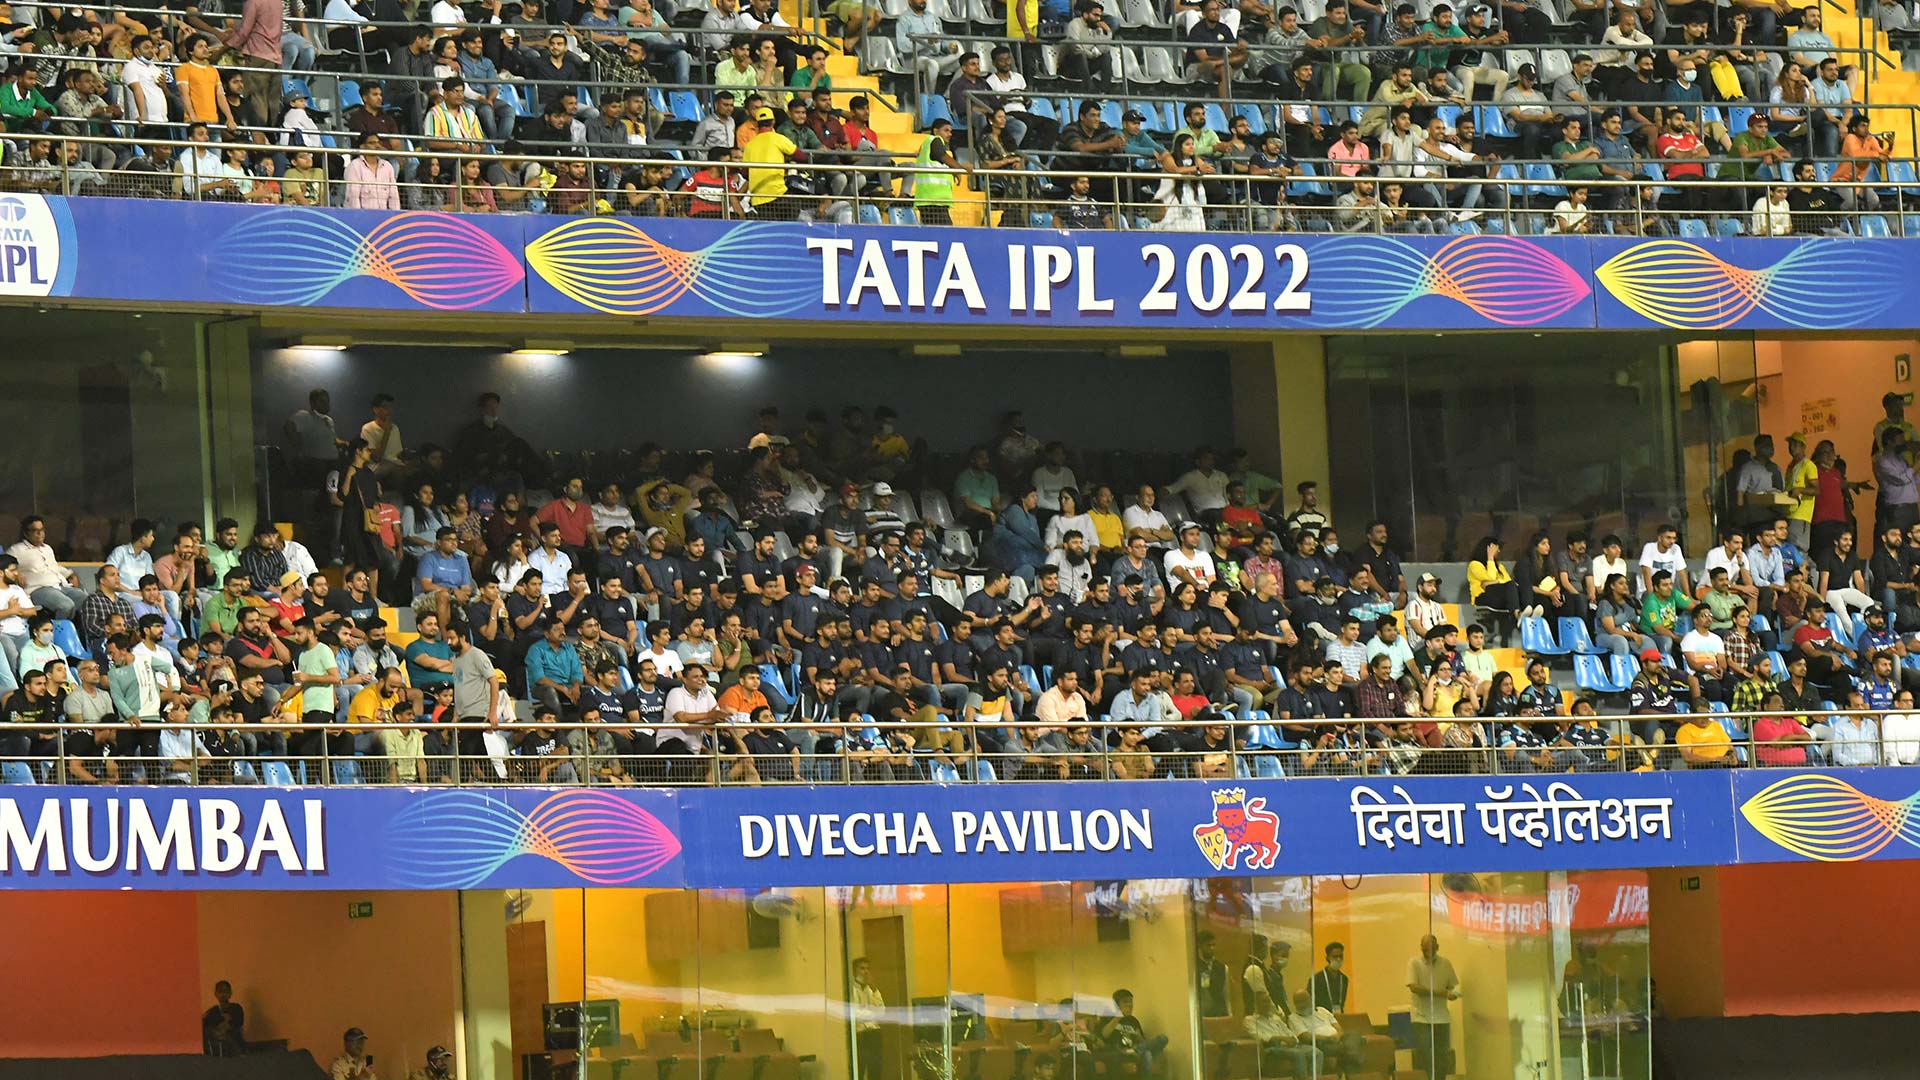 The Tata group is the title sponsor for the Indian Premier League 2022